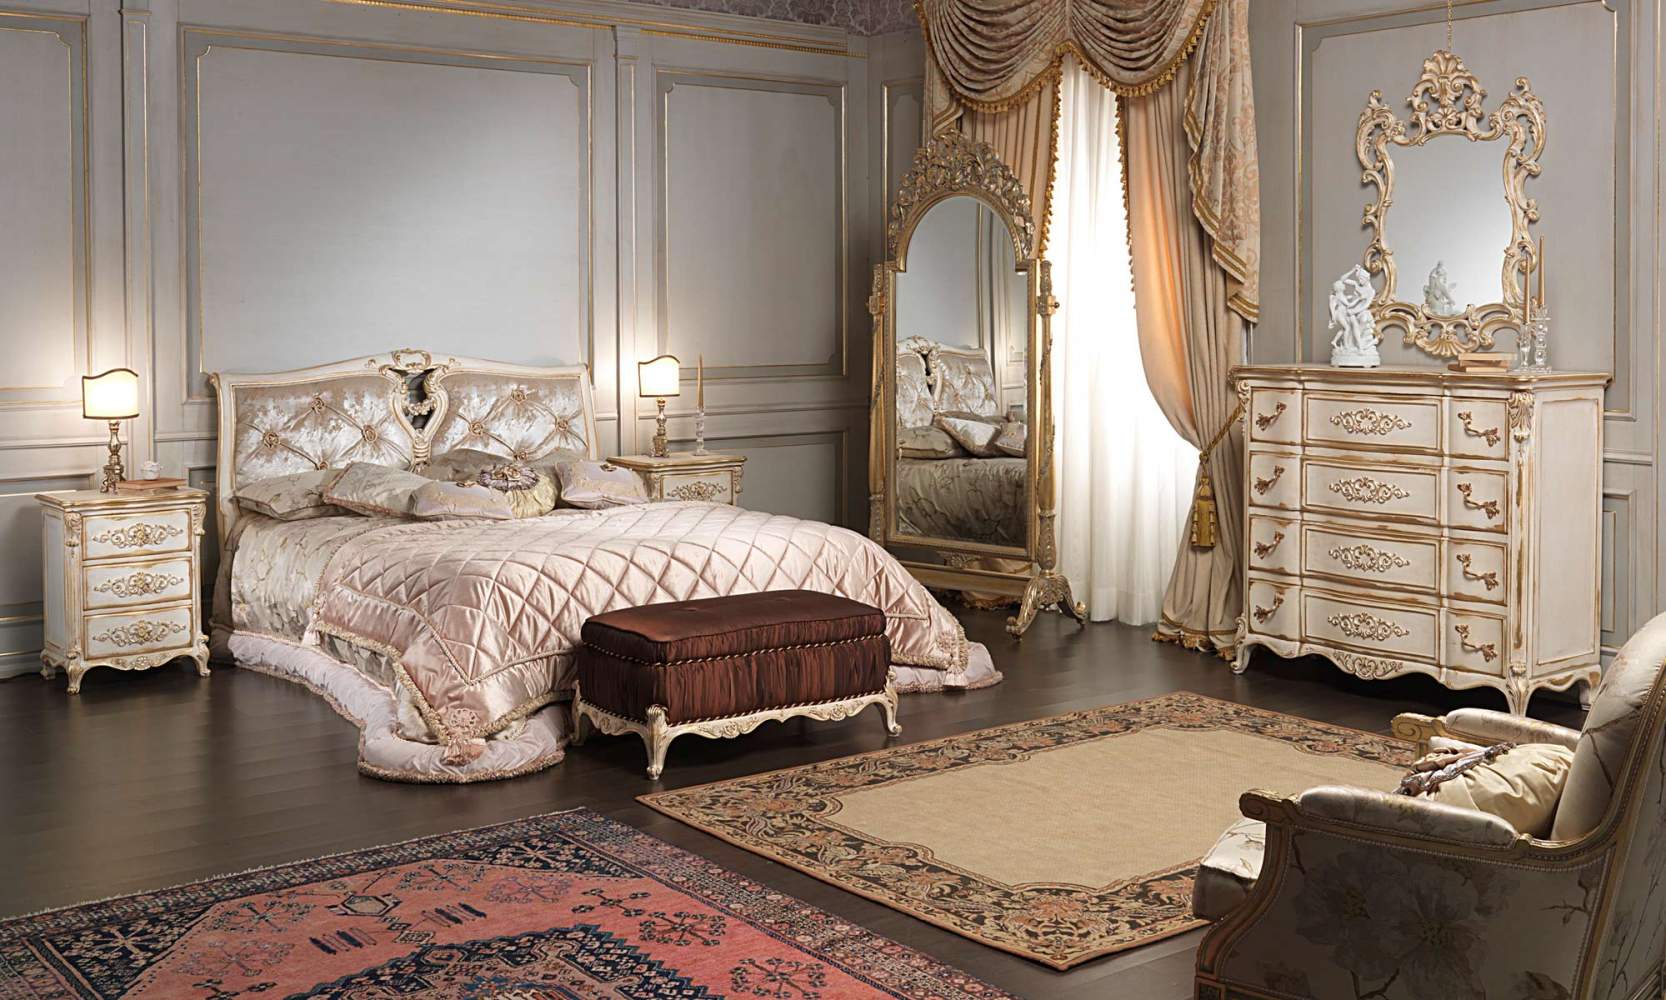 Furniture of bedroom Luigi XVI with capitonné headboard and carved furnishings, all in luxury classic style Luigi XVI